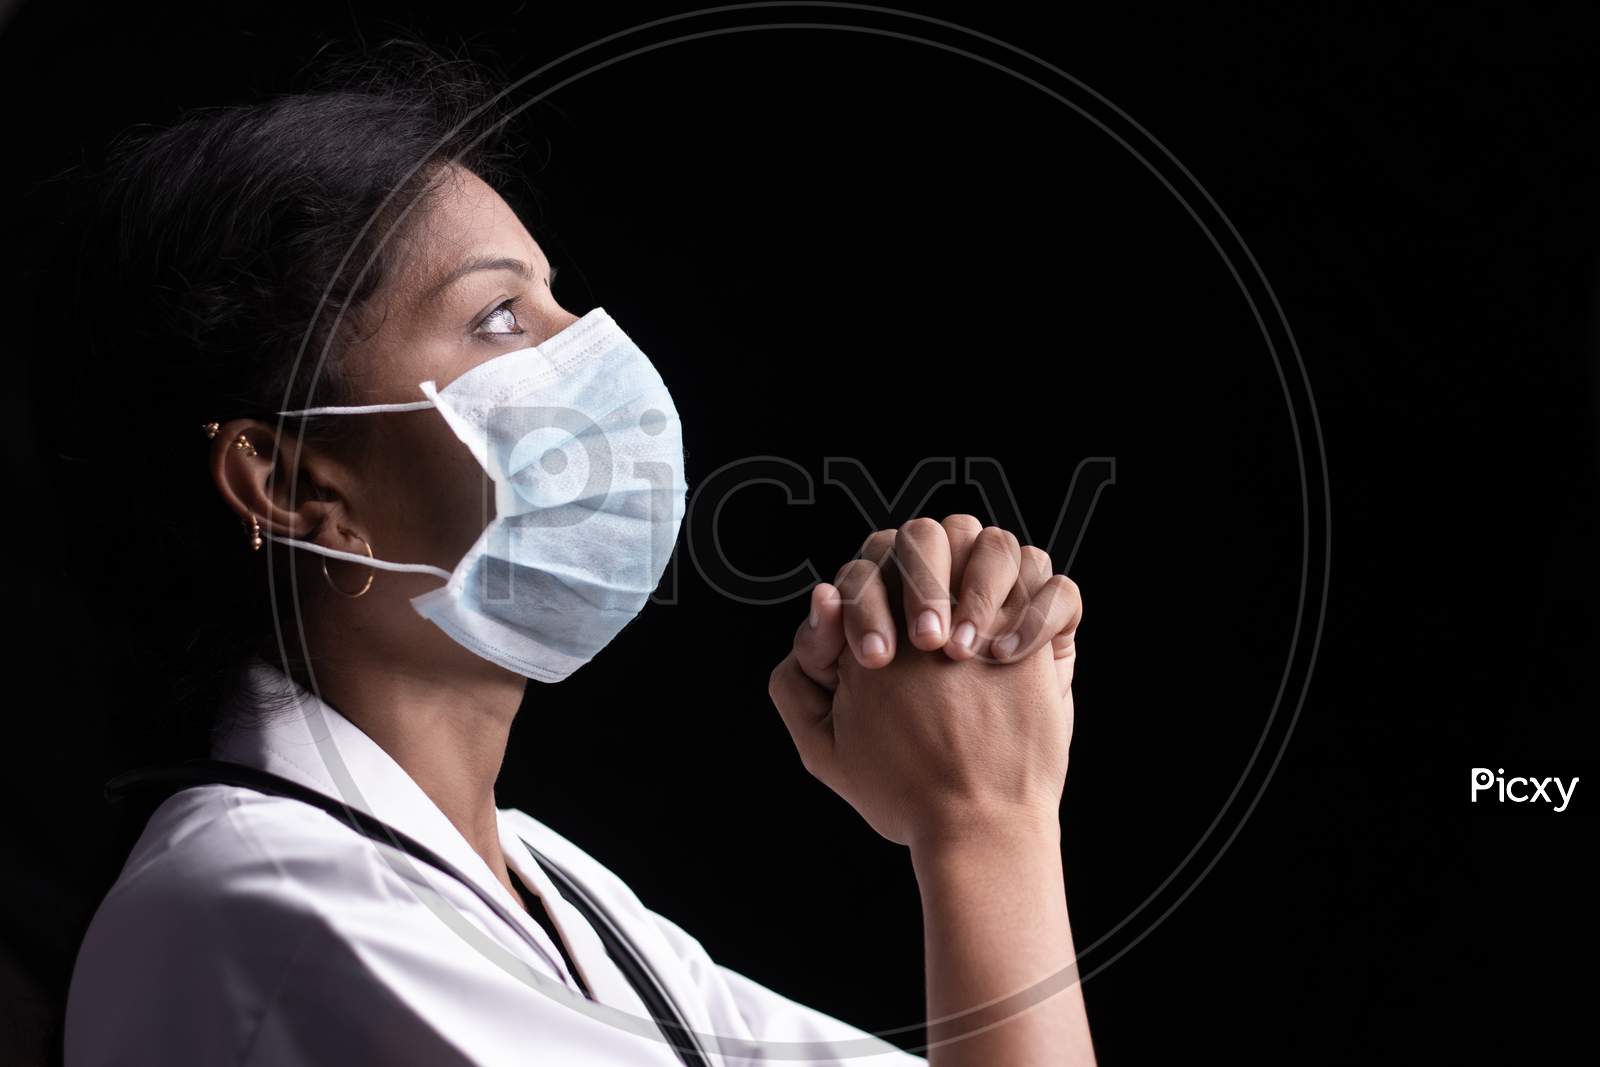 Profile View Of Young Woman Doctor In Medical Mask Praying To God On Black Background Looking Up - Concept Of Hope And Fight To End Coronavirus Or Covid-19 Crisis.